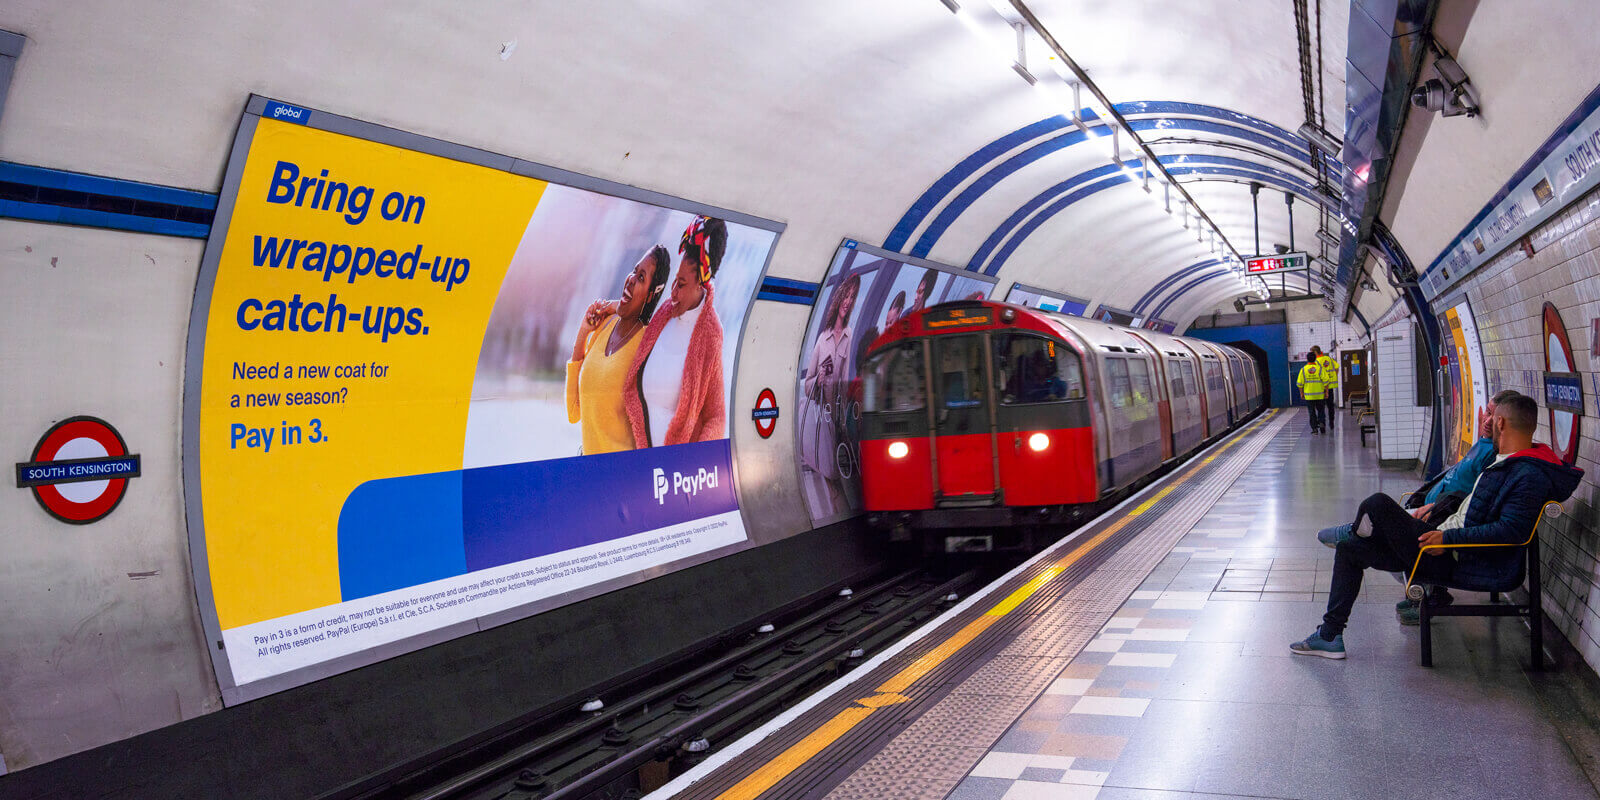 PayPal pay in 3 campaign on London's Underground.